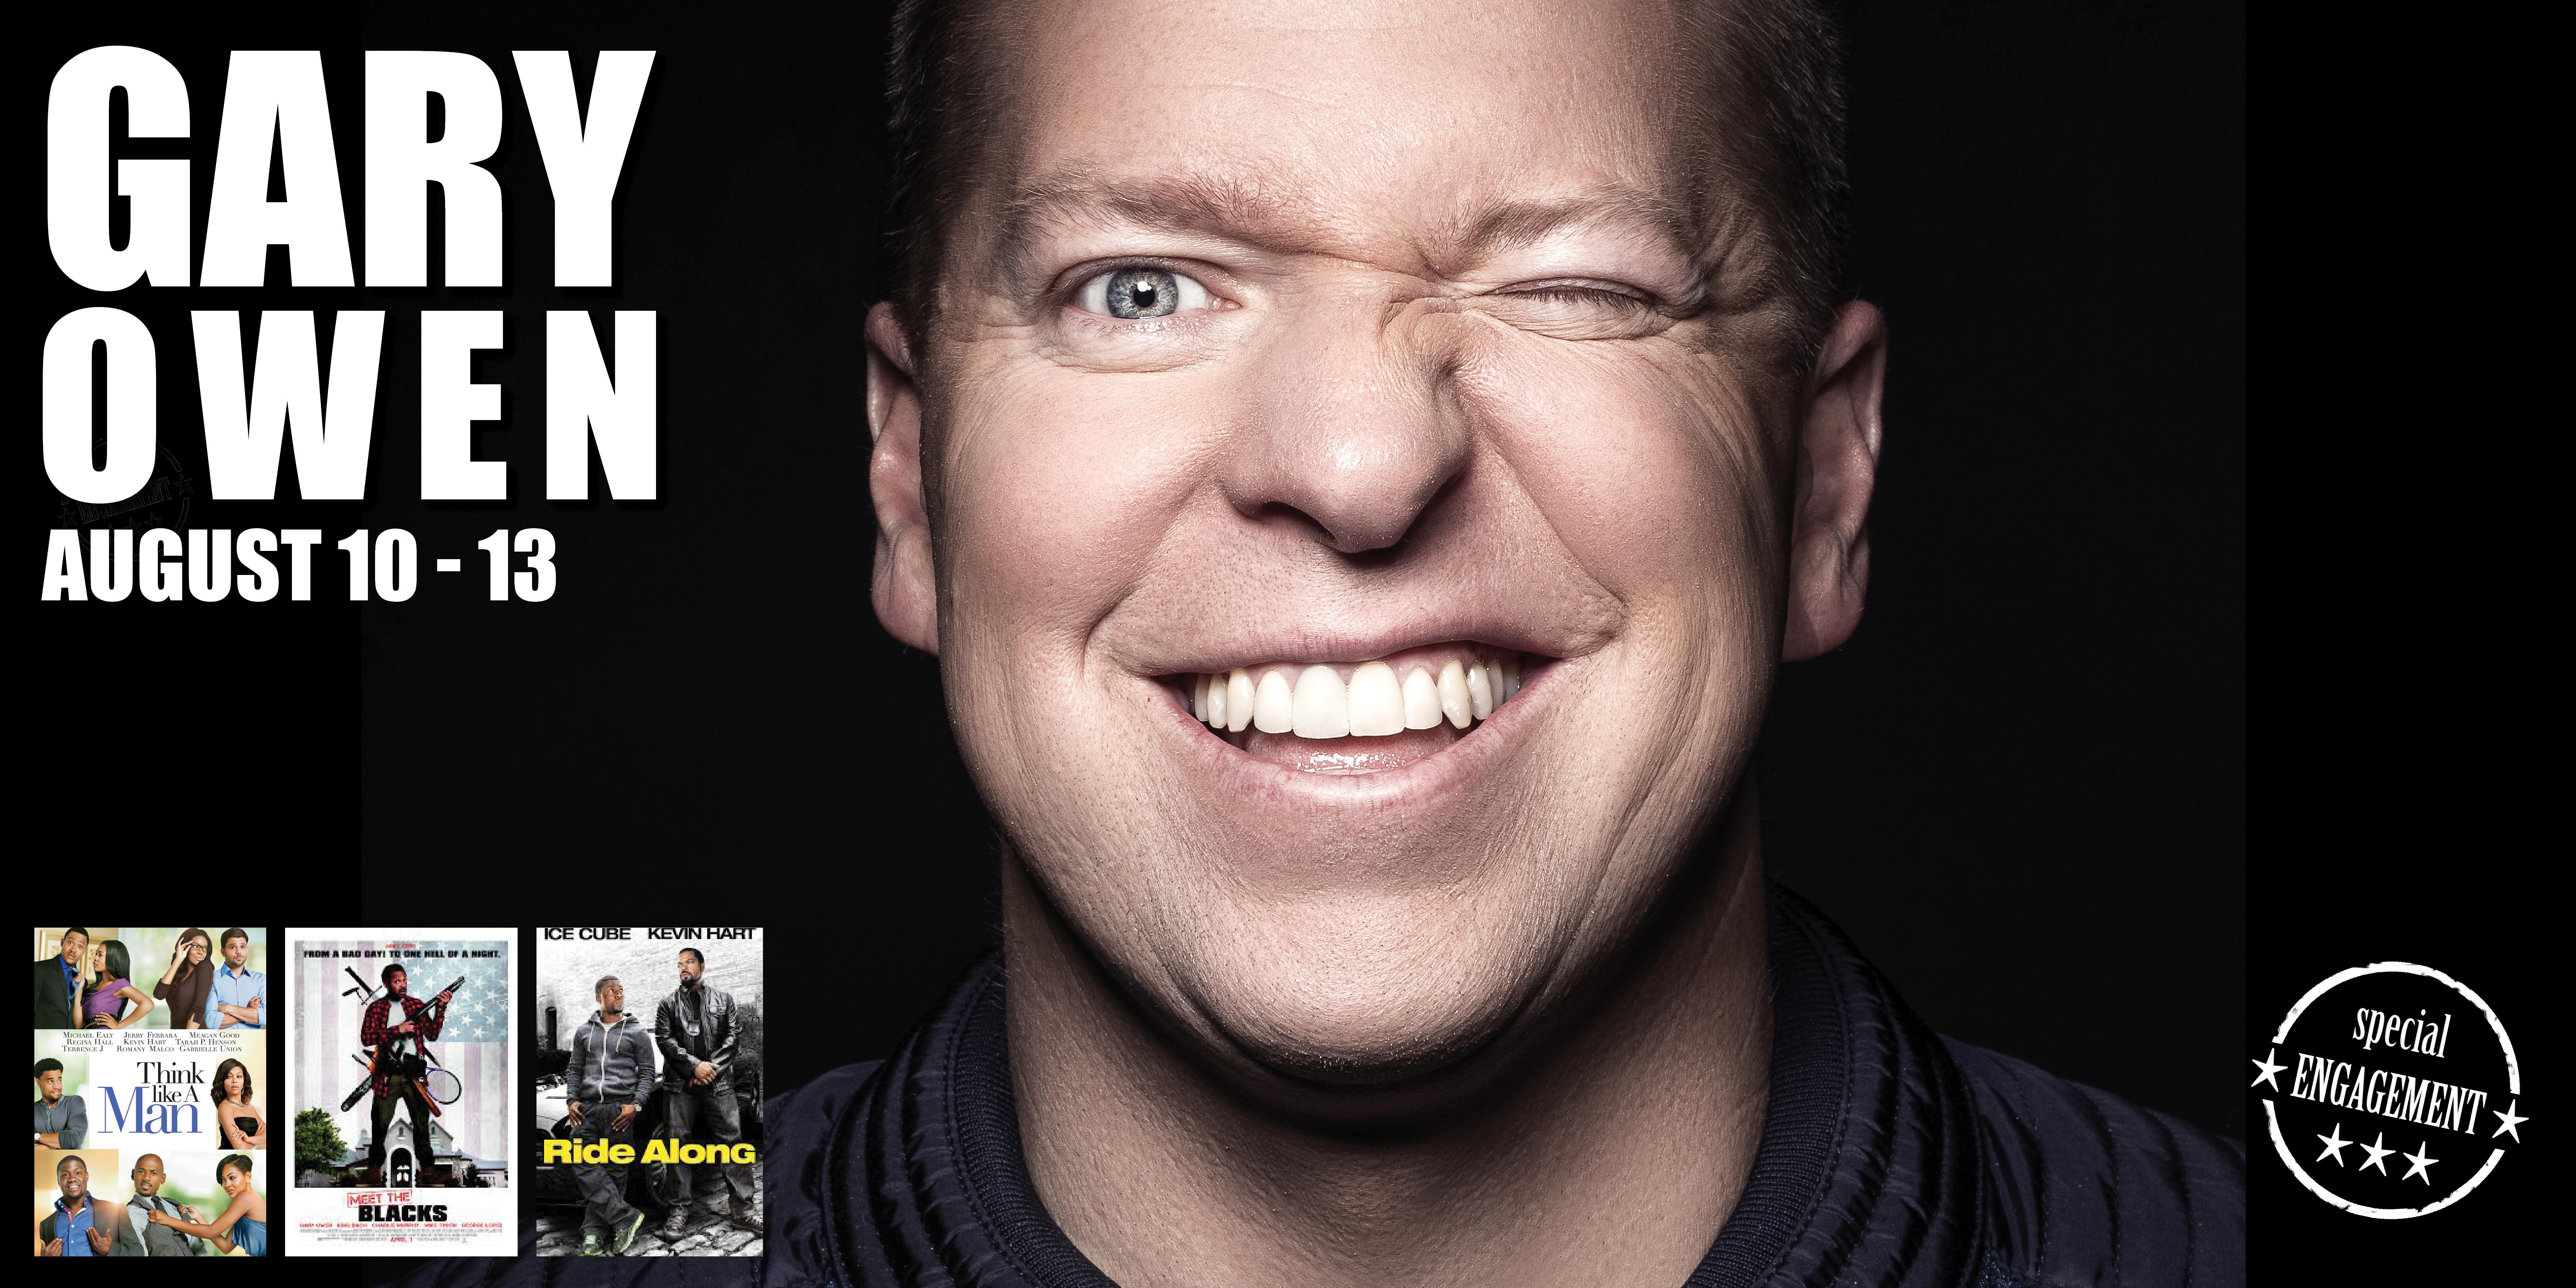 Stand up Comedian Gary Owen Live in Naples, Florida